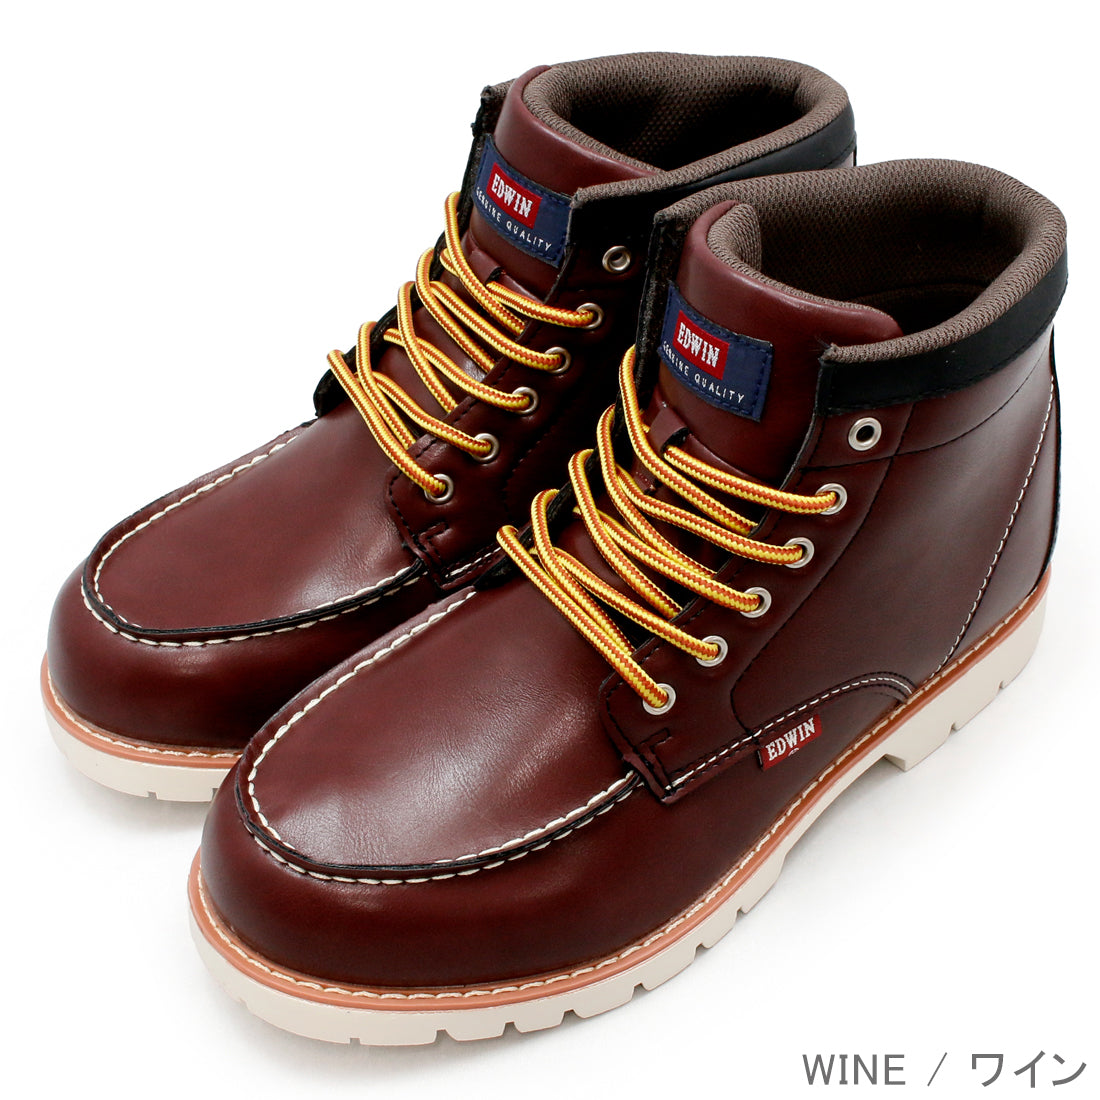 🇯🇵EDWIN casual shoes sent directly from Japan💦️waterproof☔️shoes👢📢Order